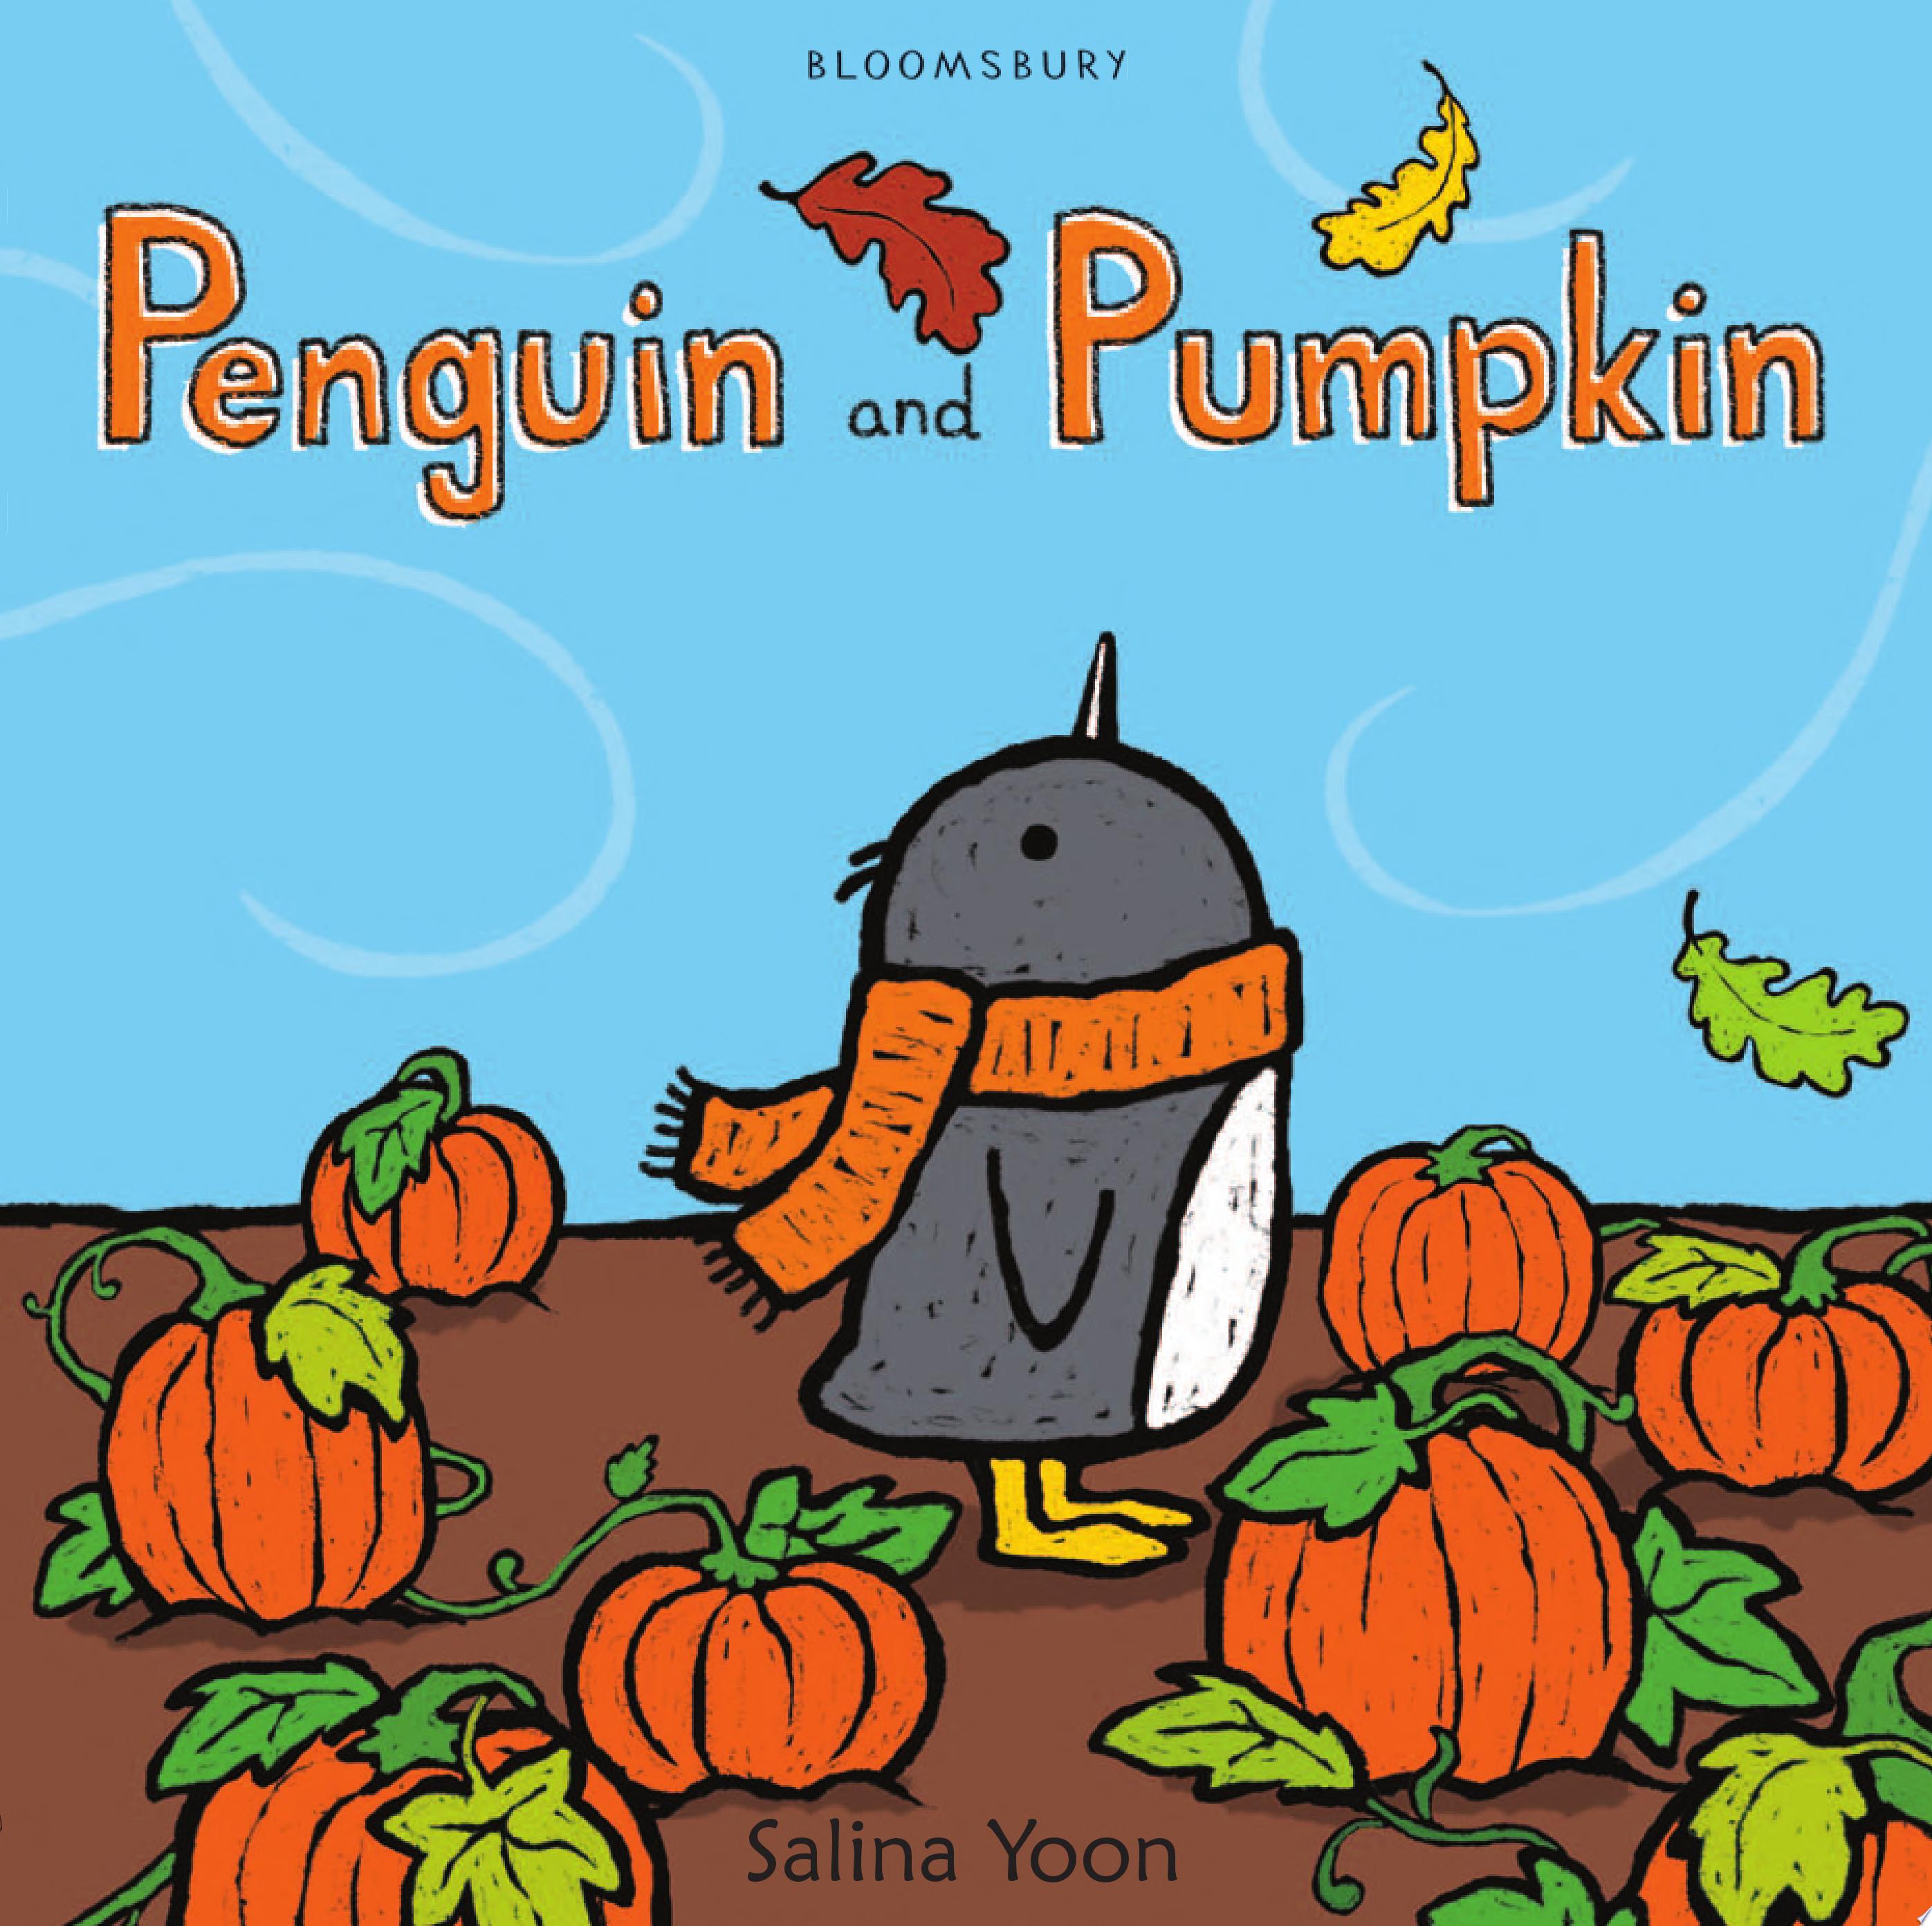 Image for "Penguin and Pumpkin"